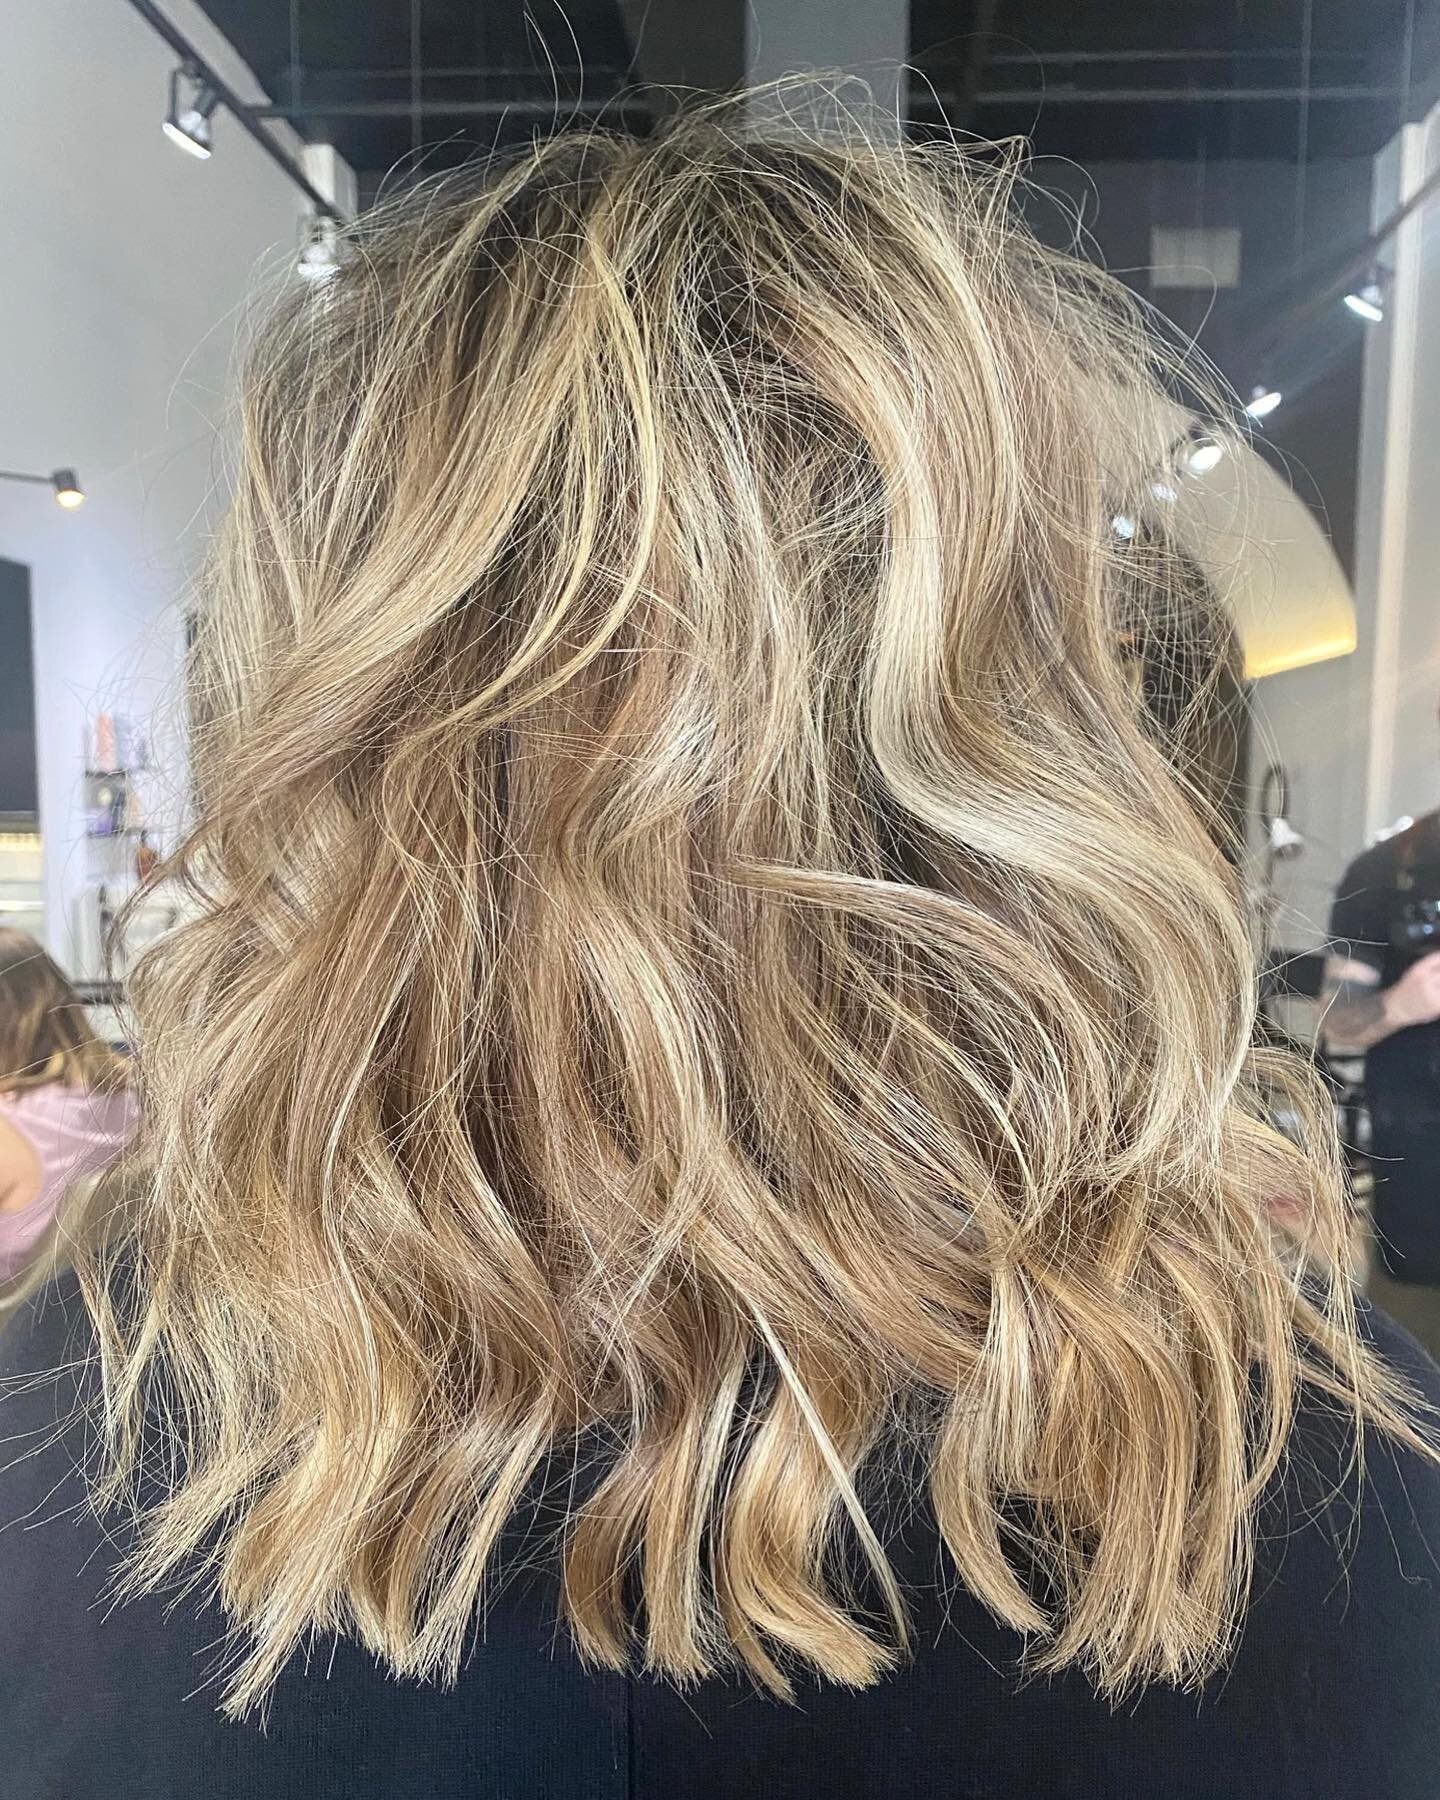 Brightness + movement in all the right places 👌🏼
.
.
Color/cut - @leighleighhair 
.
.
.

@shortnorthartsdistrict 
#colabhairstudio #forthesakeofgoodhair #shortnorthartsdistrict #shortnorthcolumbus #columbushairstylist #614hair #onlyincbus #dimensio